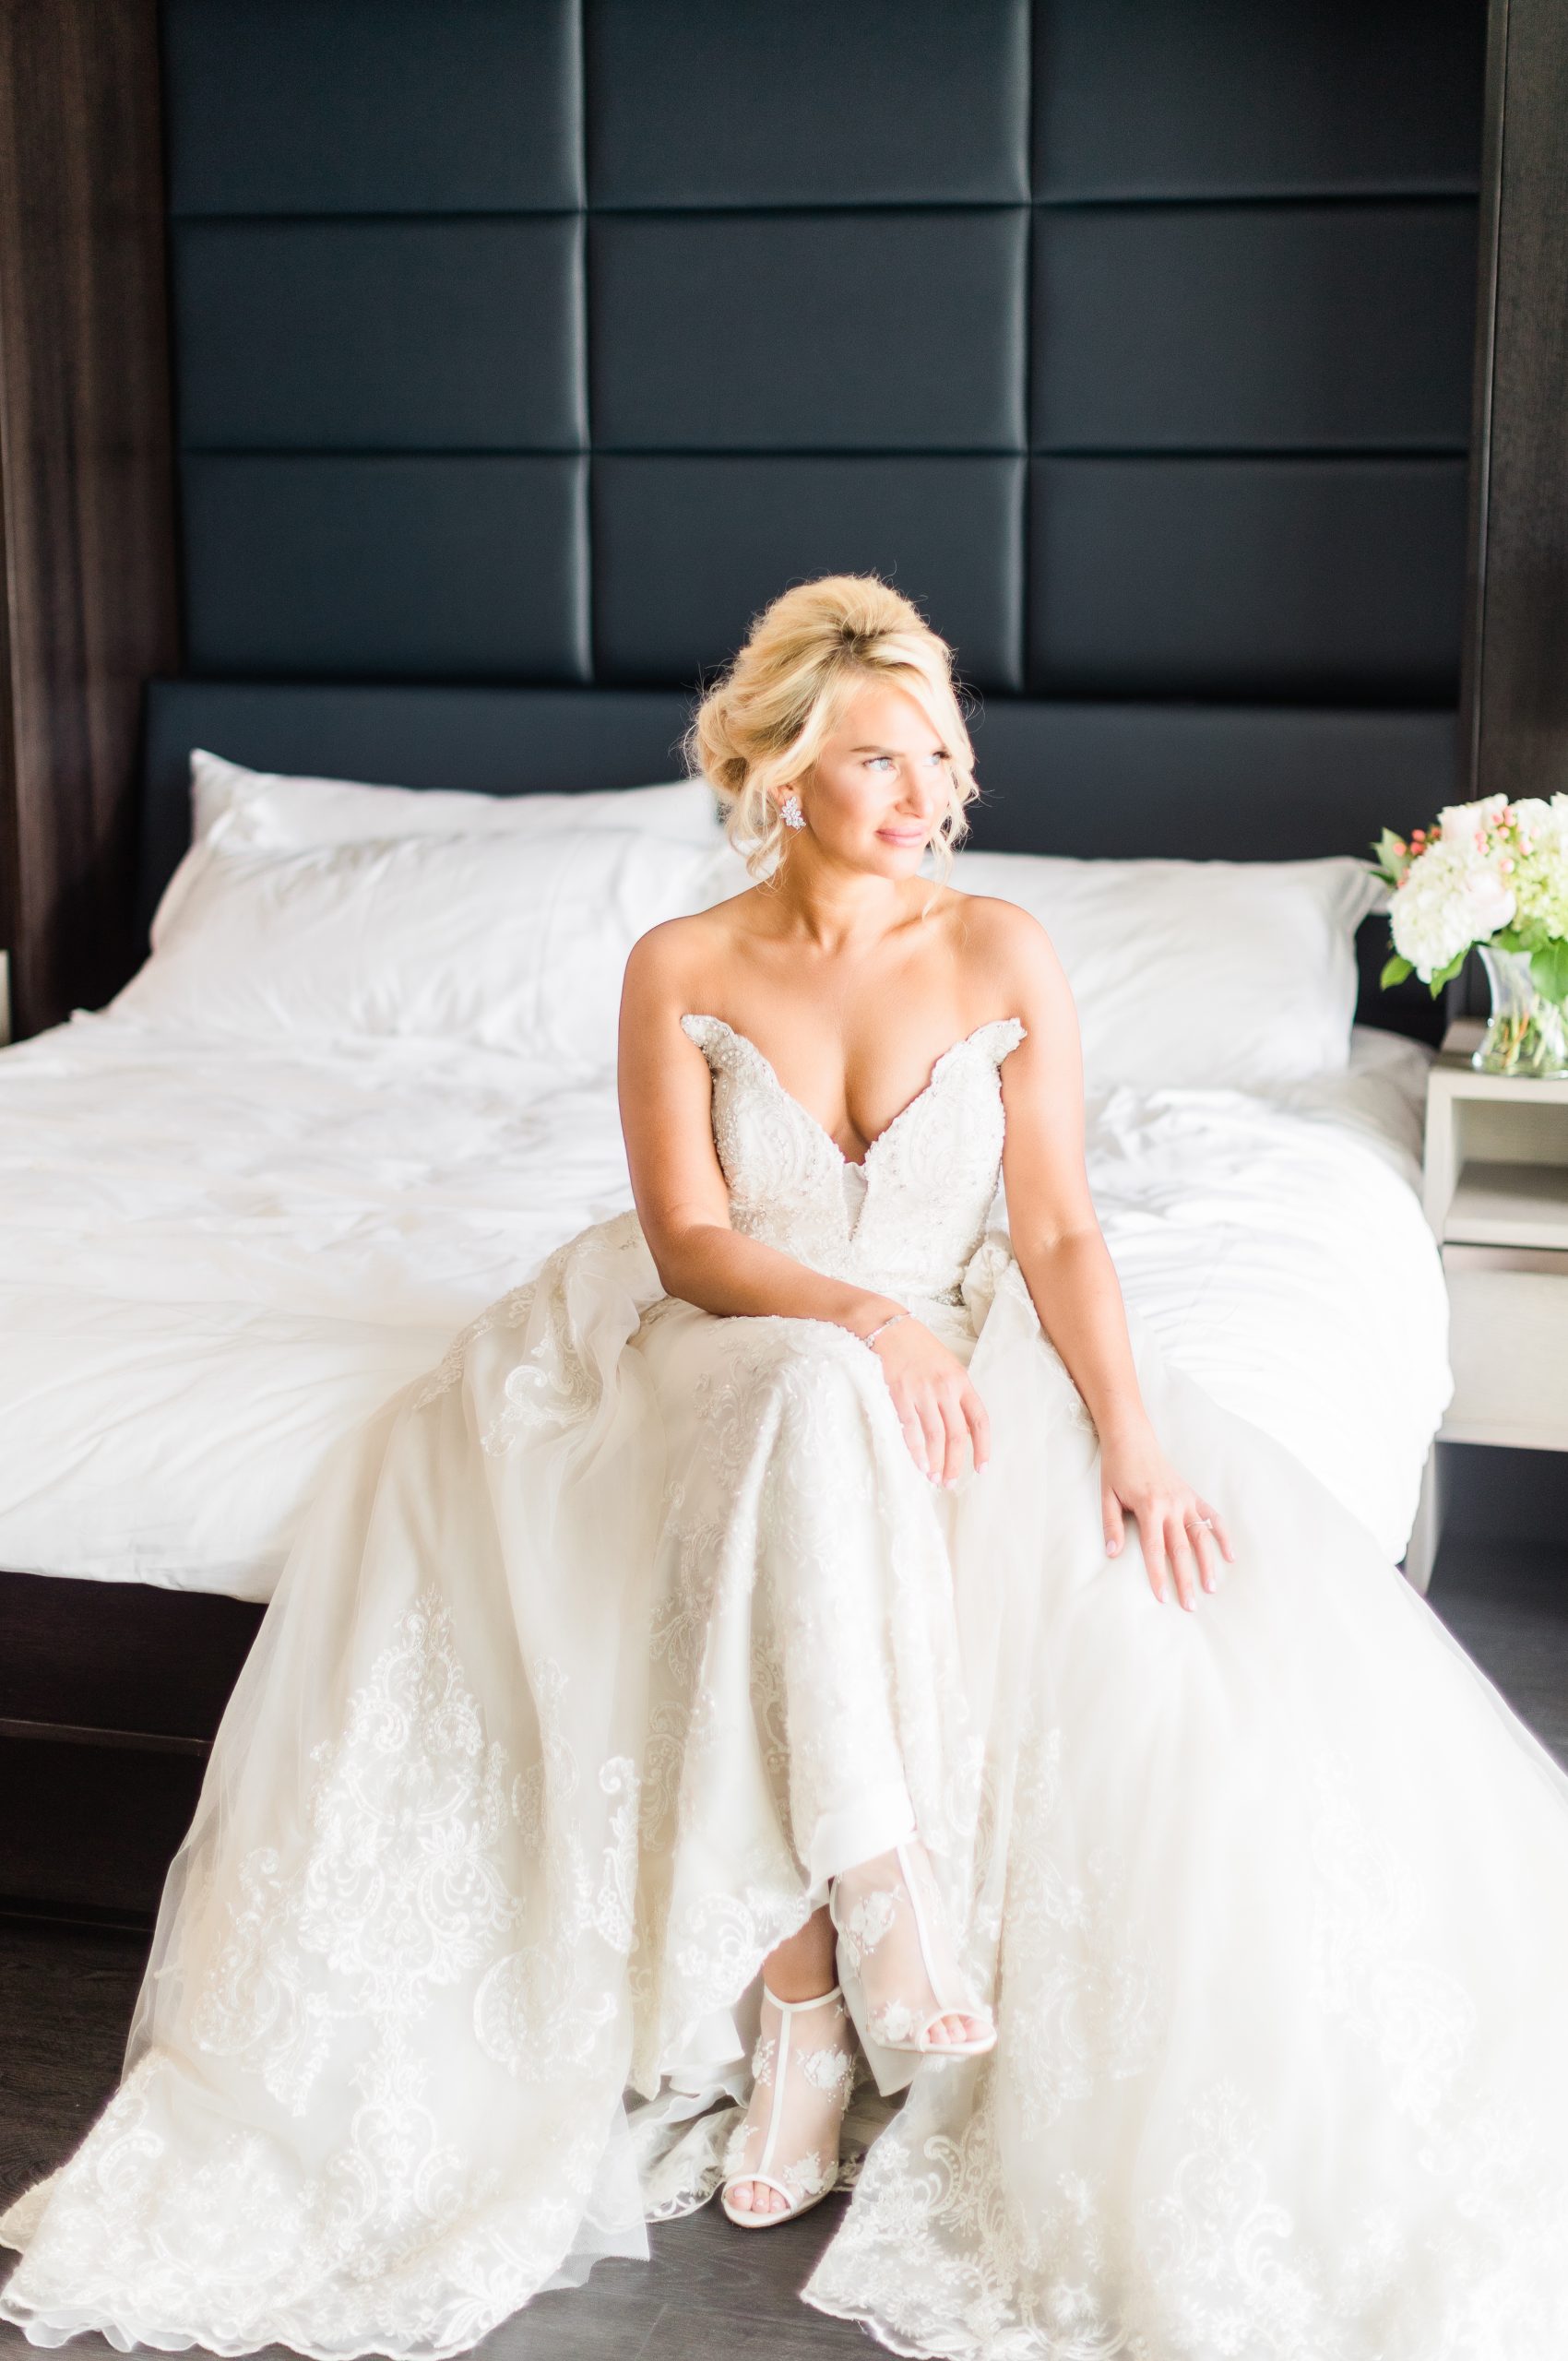 Wedding Dress Alterations and Fittings: Insider's Advice